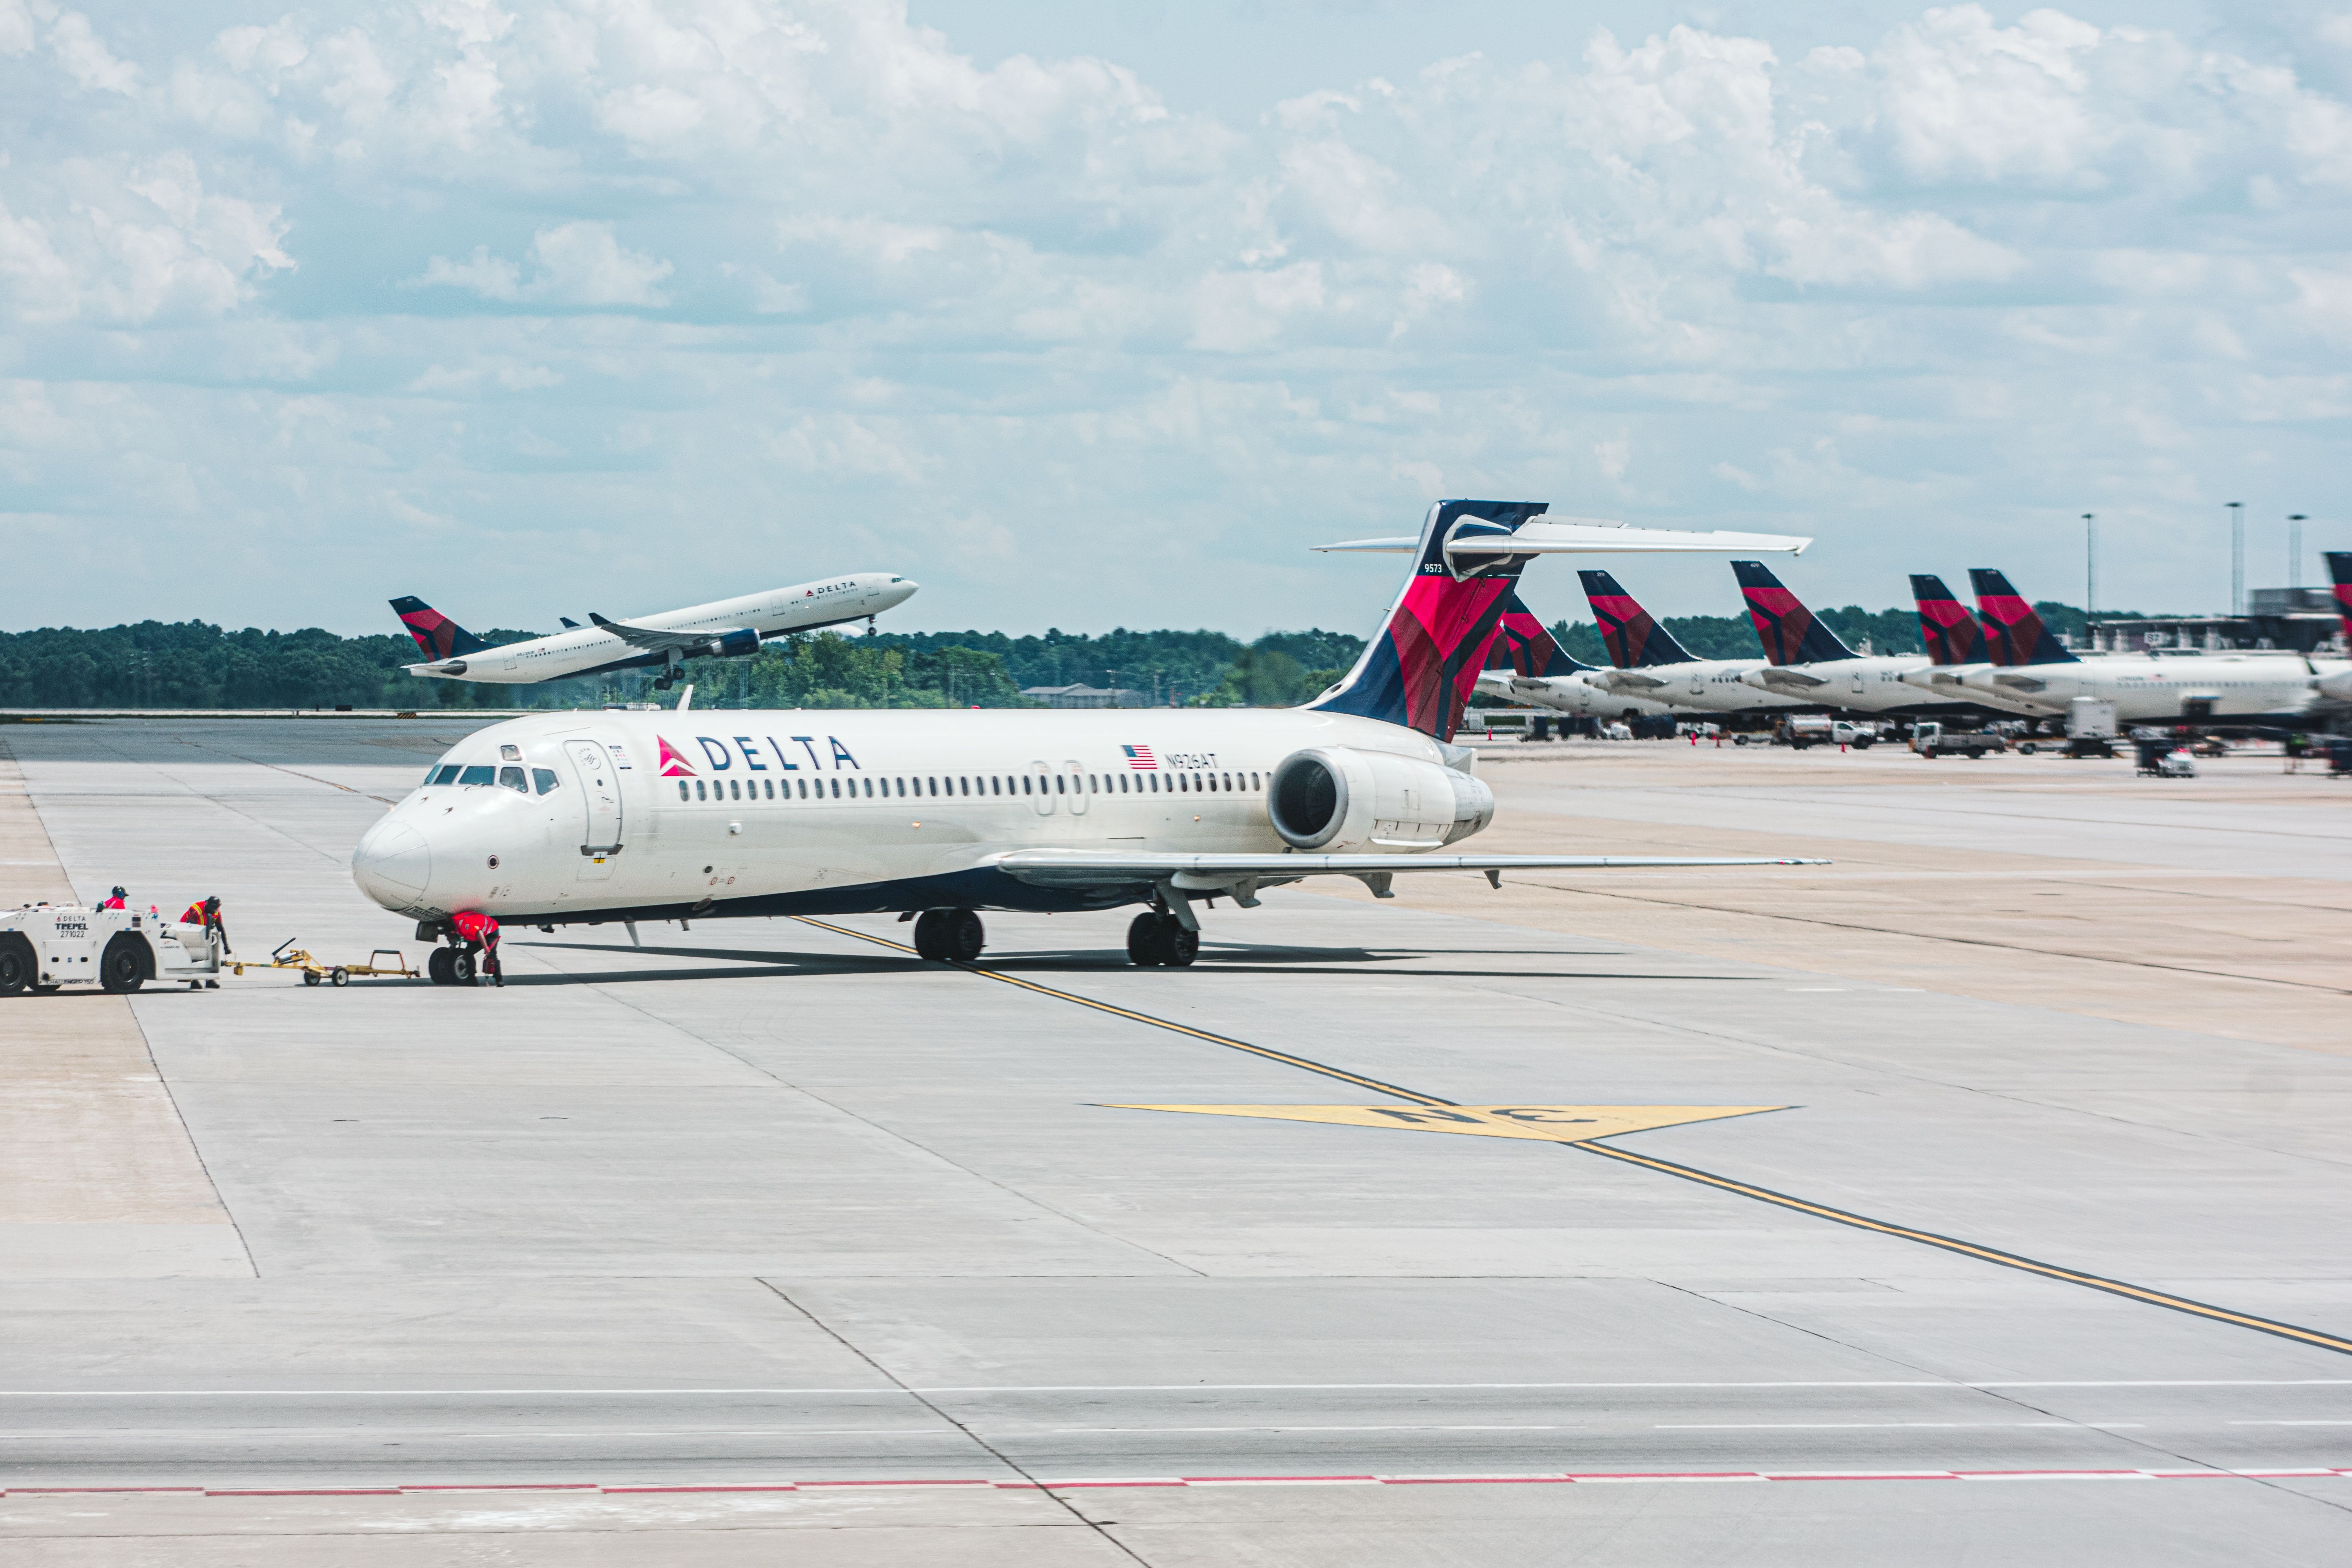 Boeing 717 ATL from Delta Air Lines